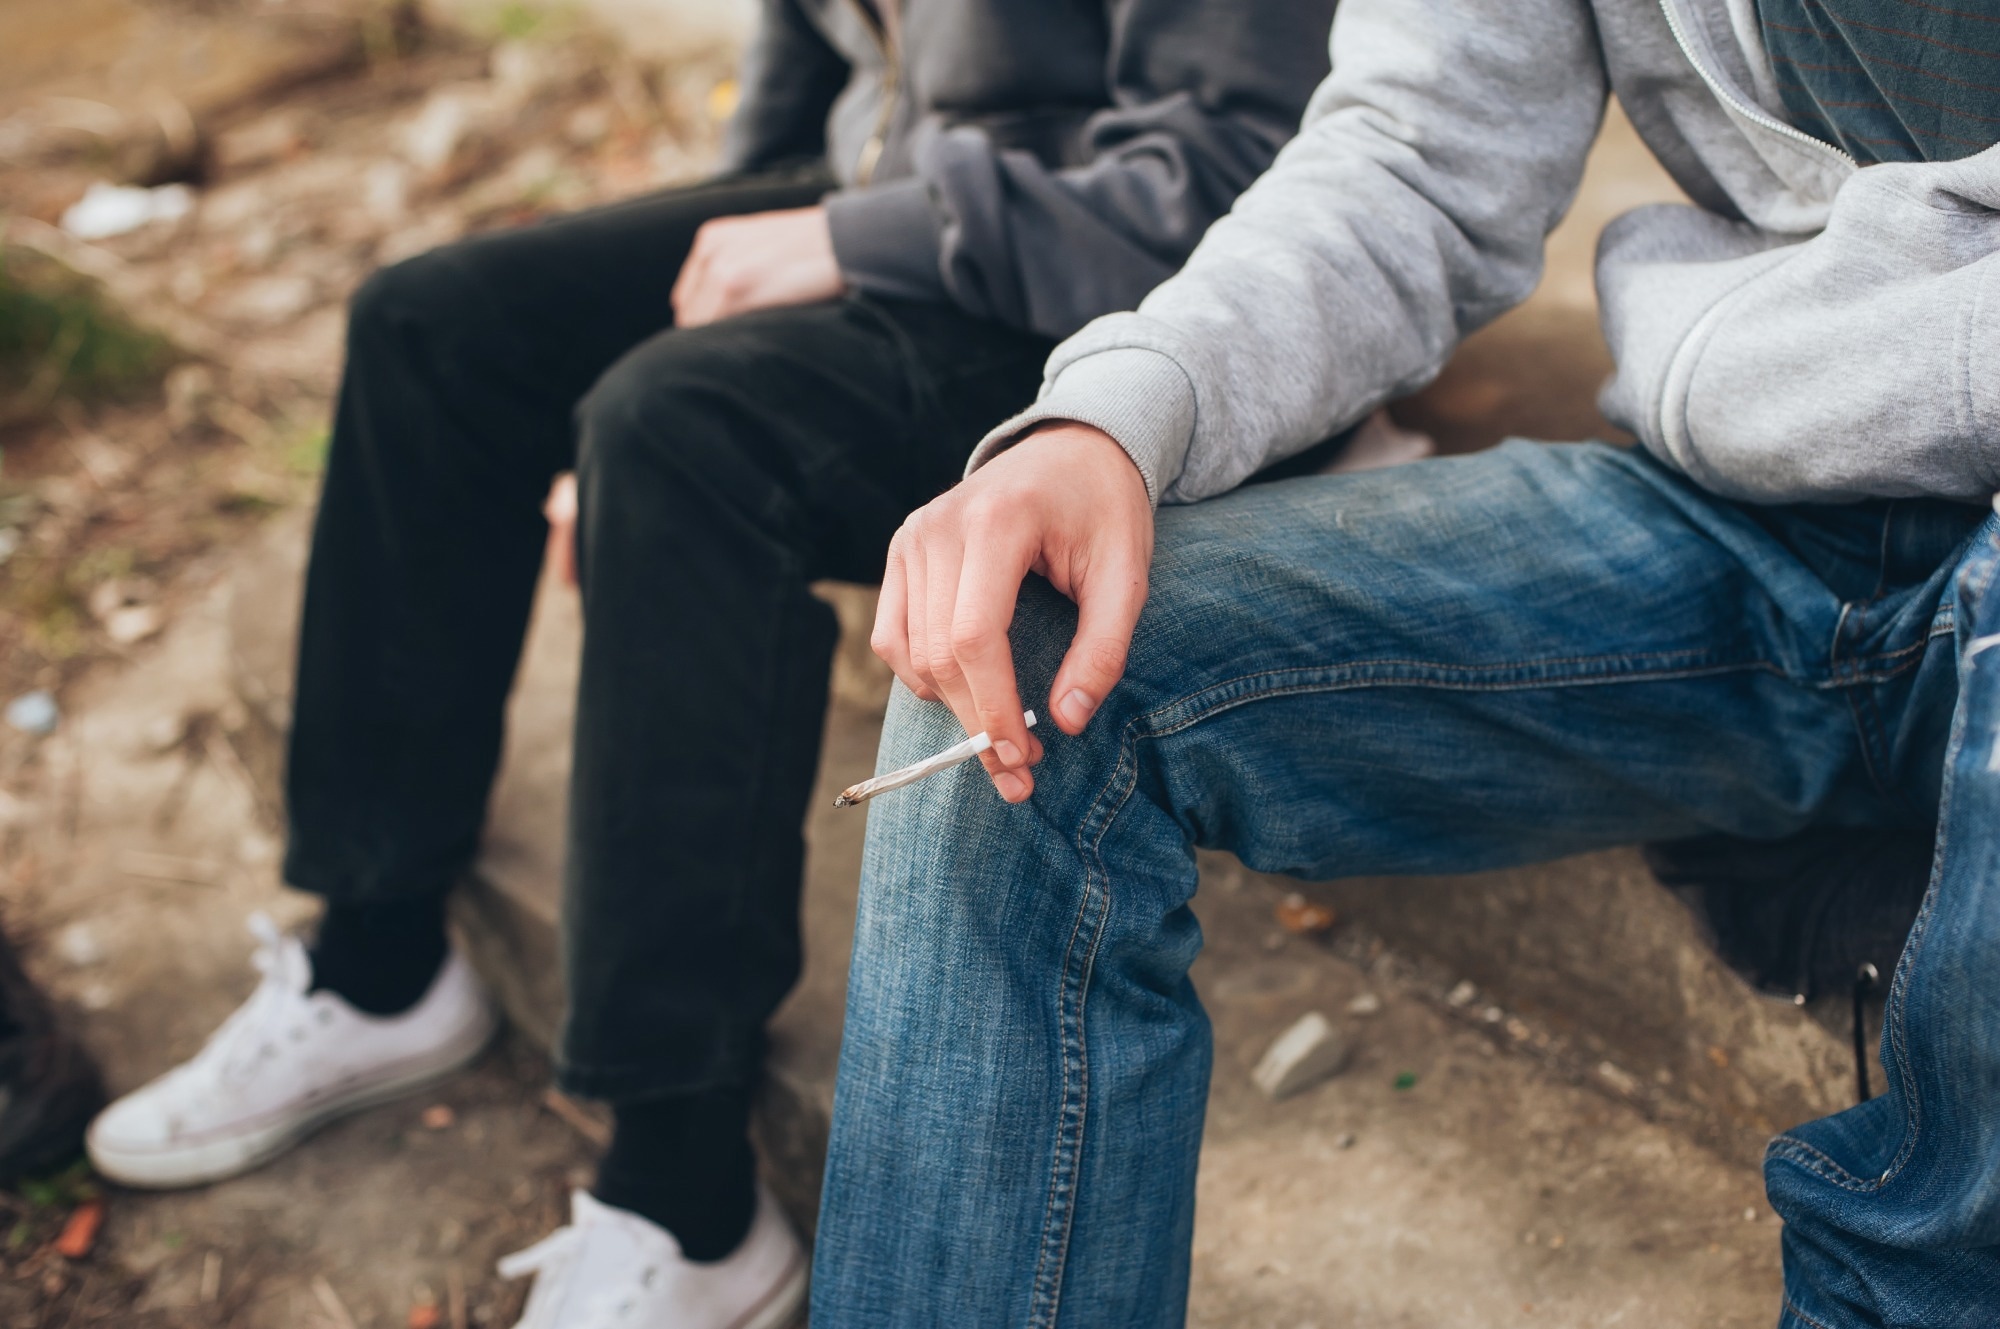 Study: Emotion dysregulation in relation to cannabis use and mental health among young adults. Image Credit: guruXOX / Shutterstock.com